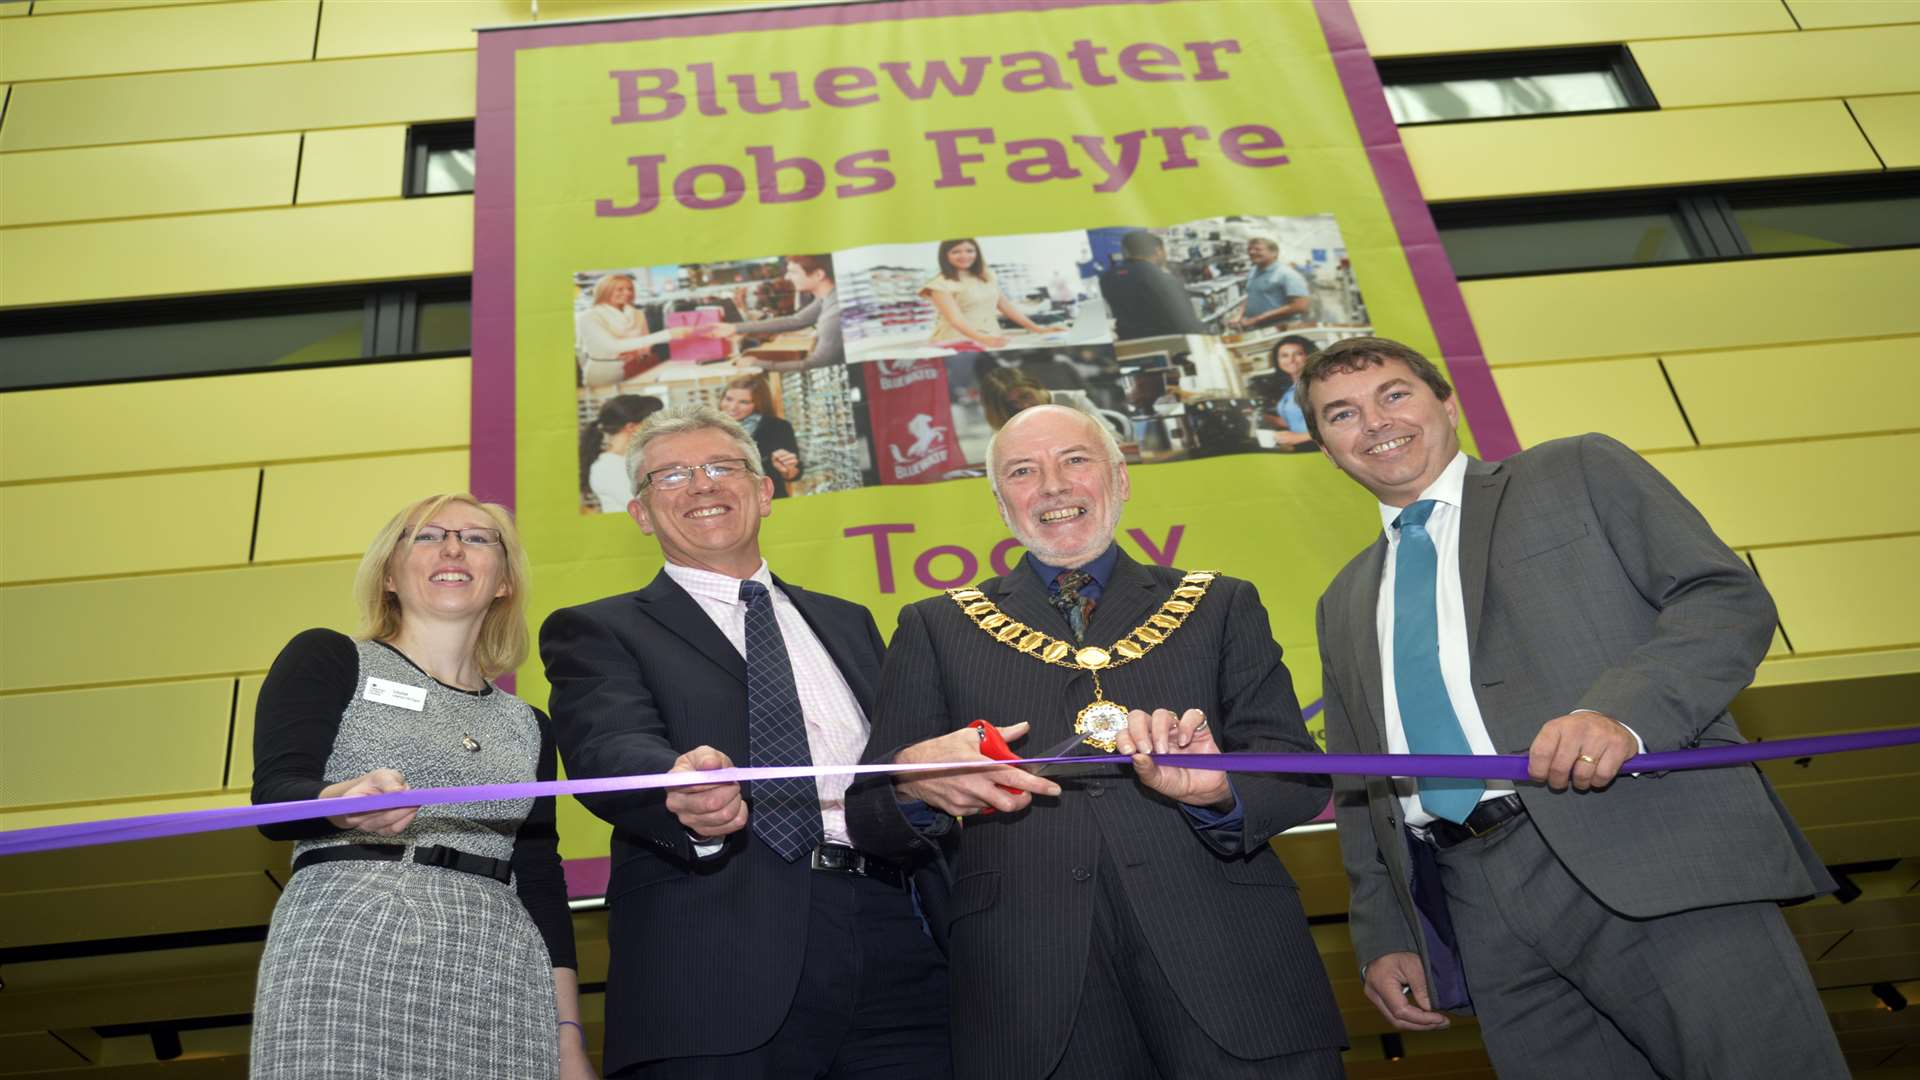 Bluewater jobs fair was opened by, from left, the Department of Work and Pensions' Louise Leighton-McTague, Bluewater’s head of marketing David Wilkinson, Mayor of Dartford Ian Armitt and Dartford MP Gareth Johnson